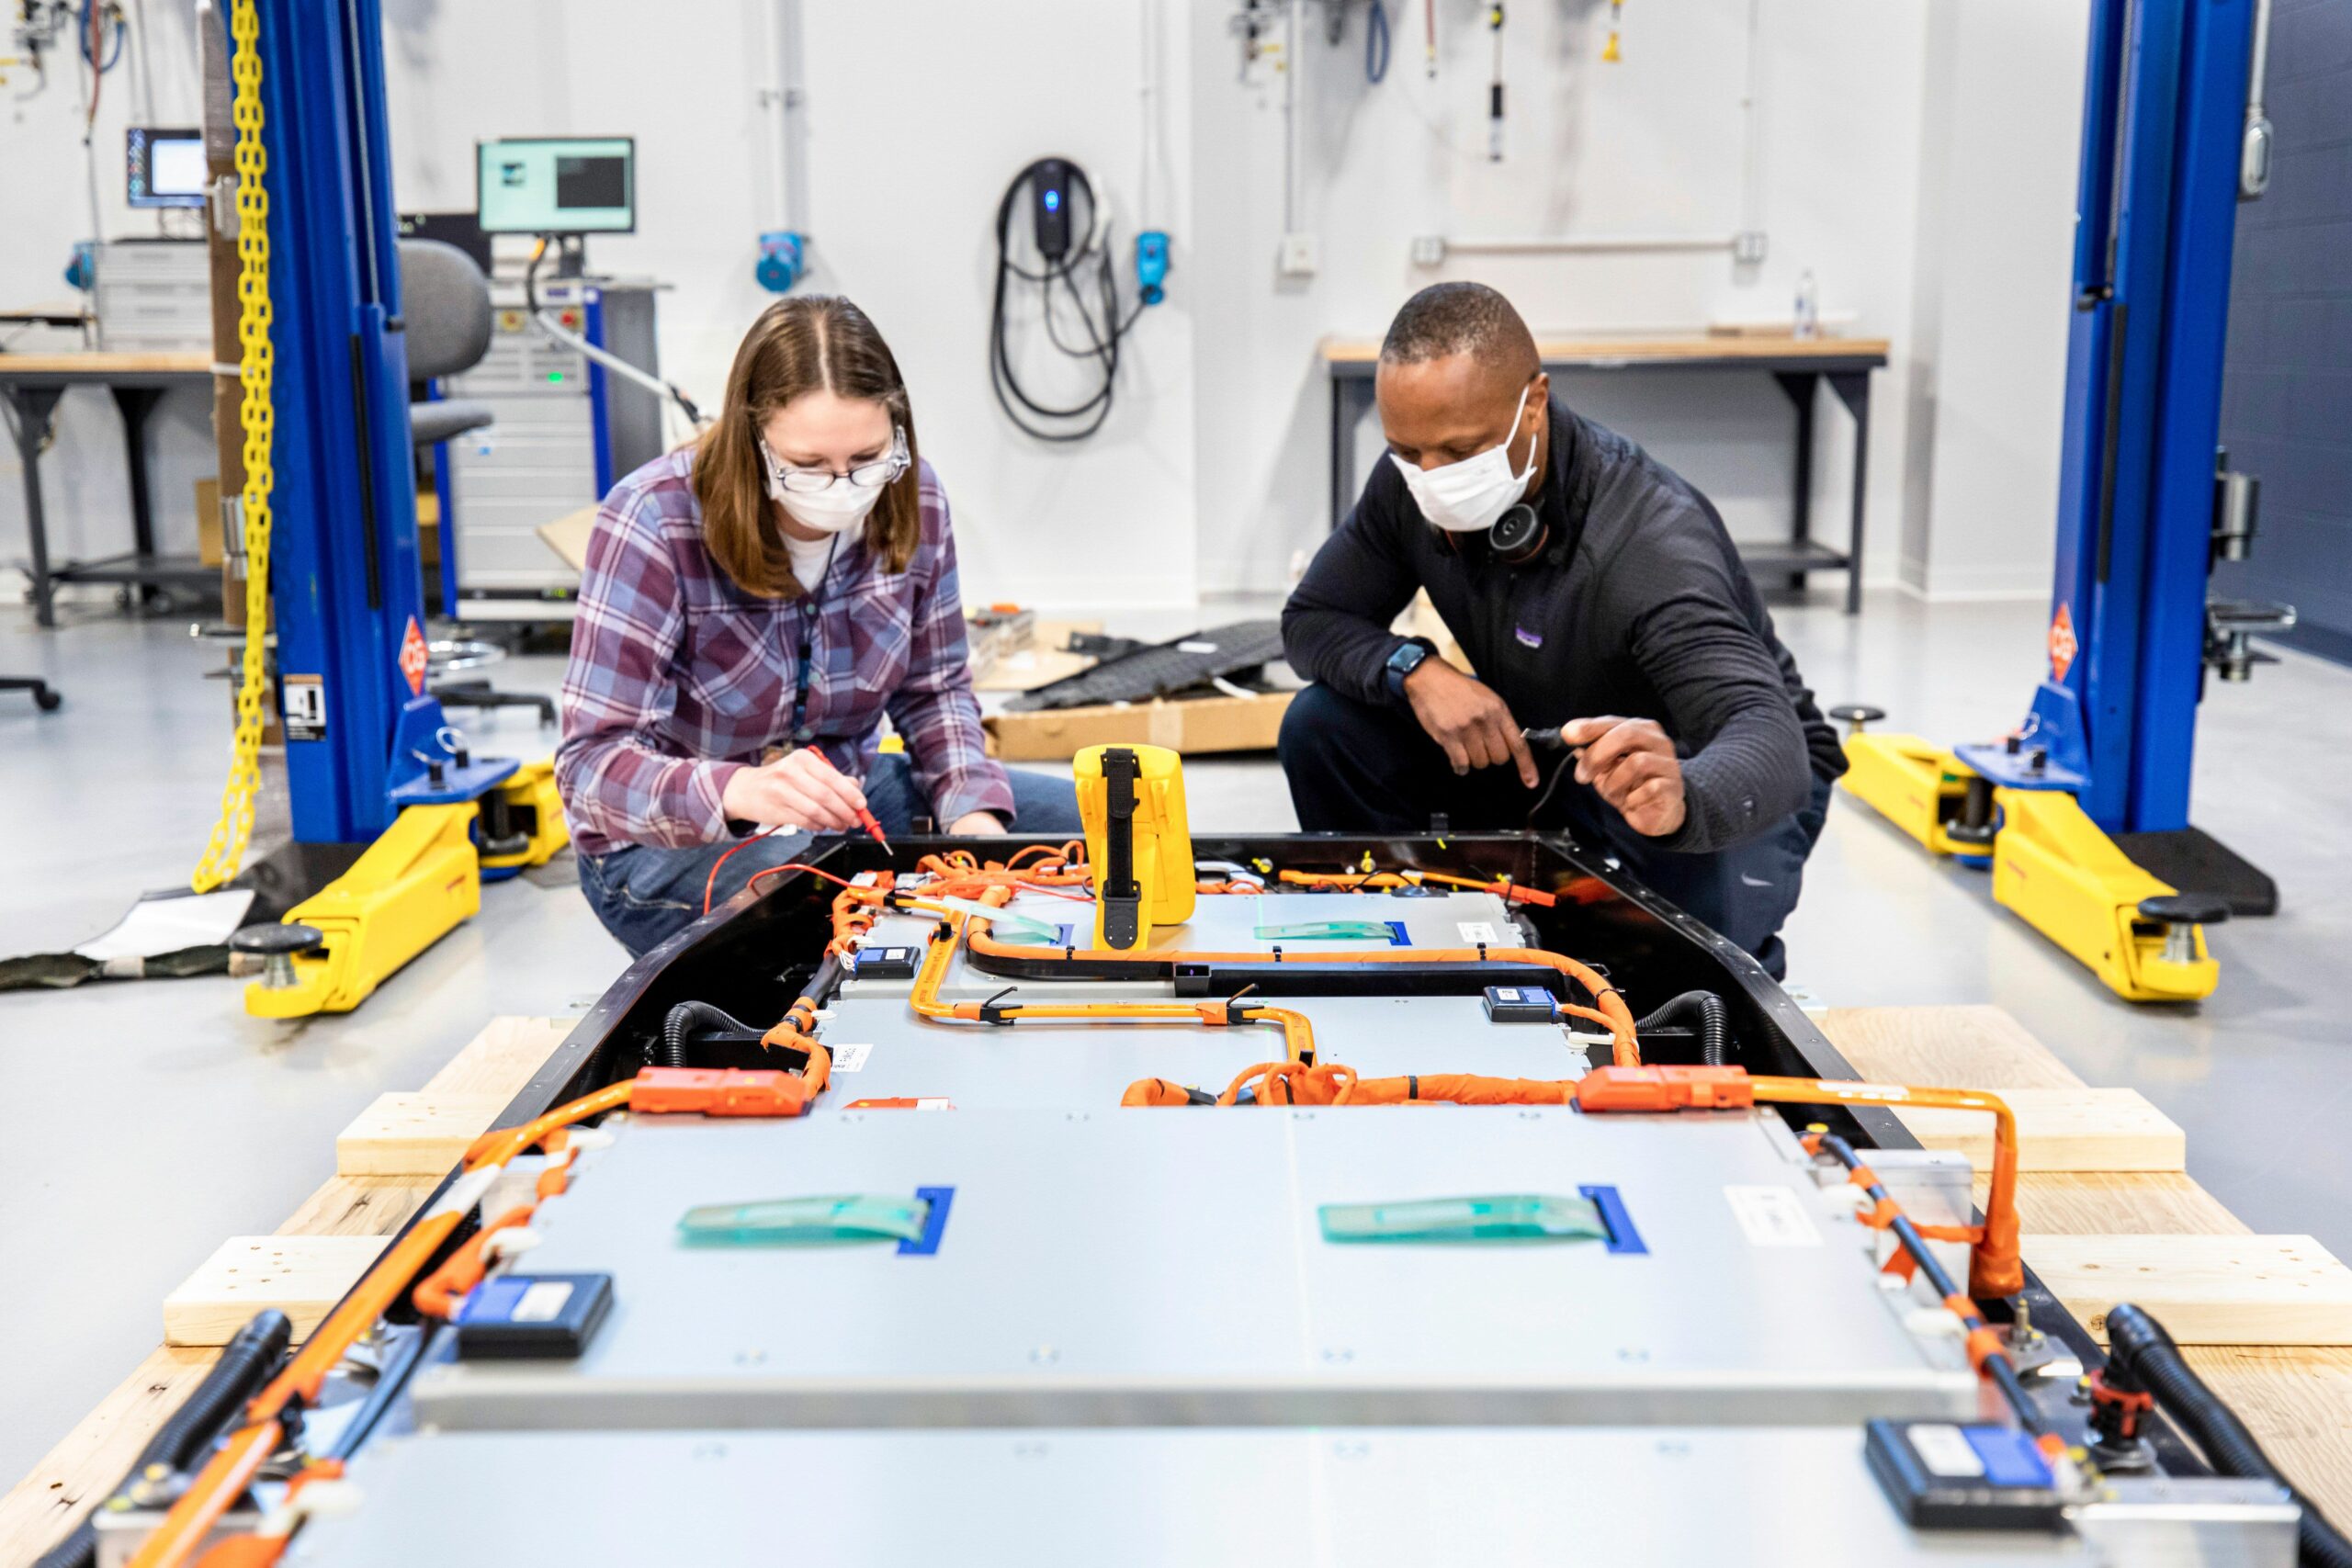 Ford publicizes three way partnership to fabricate EV battery cells in U.S.